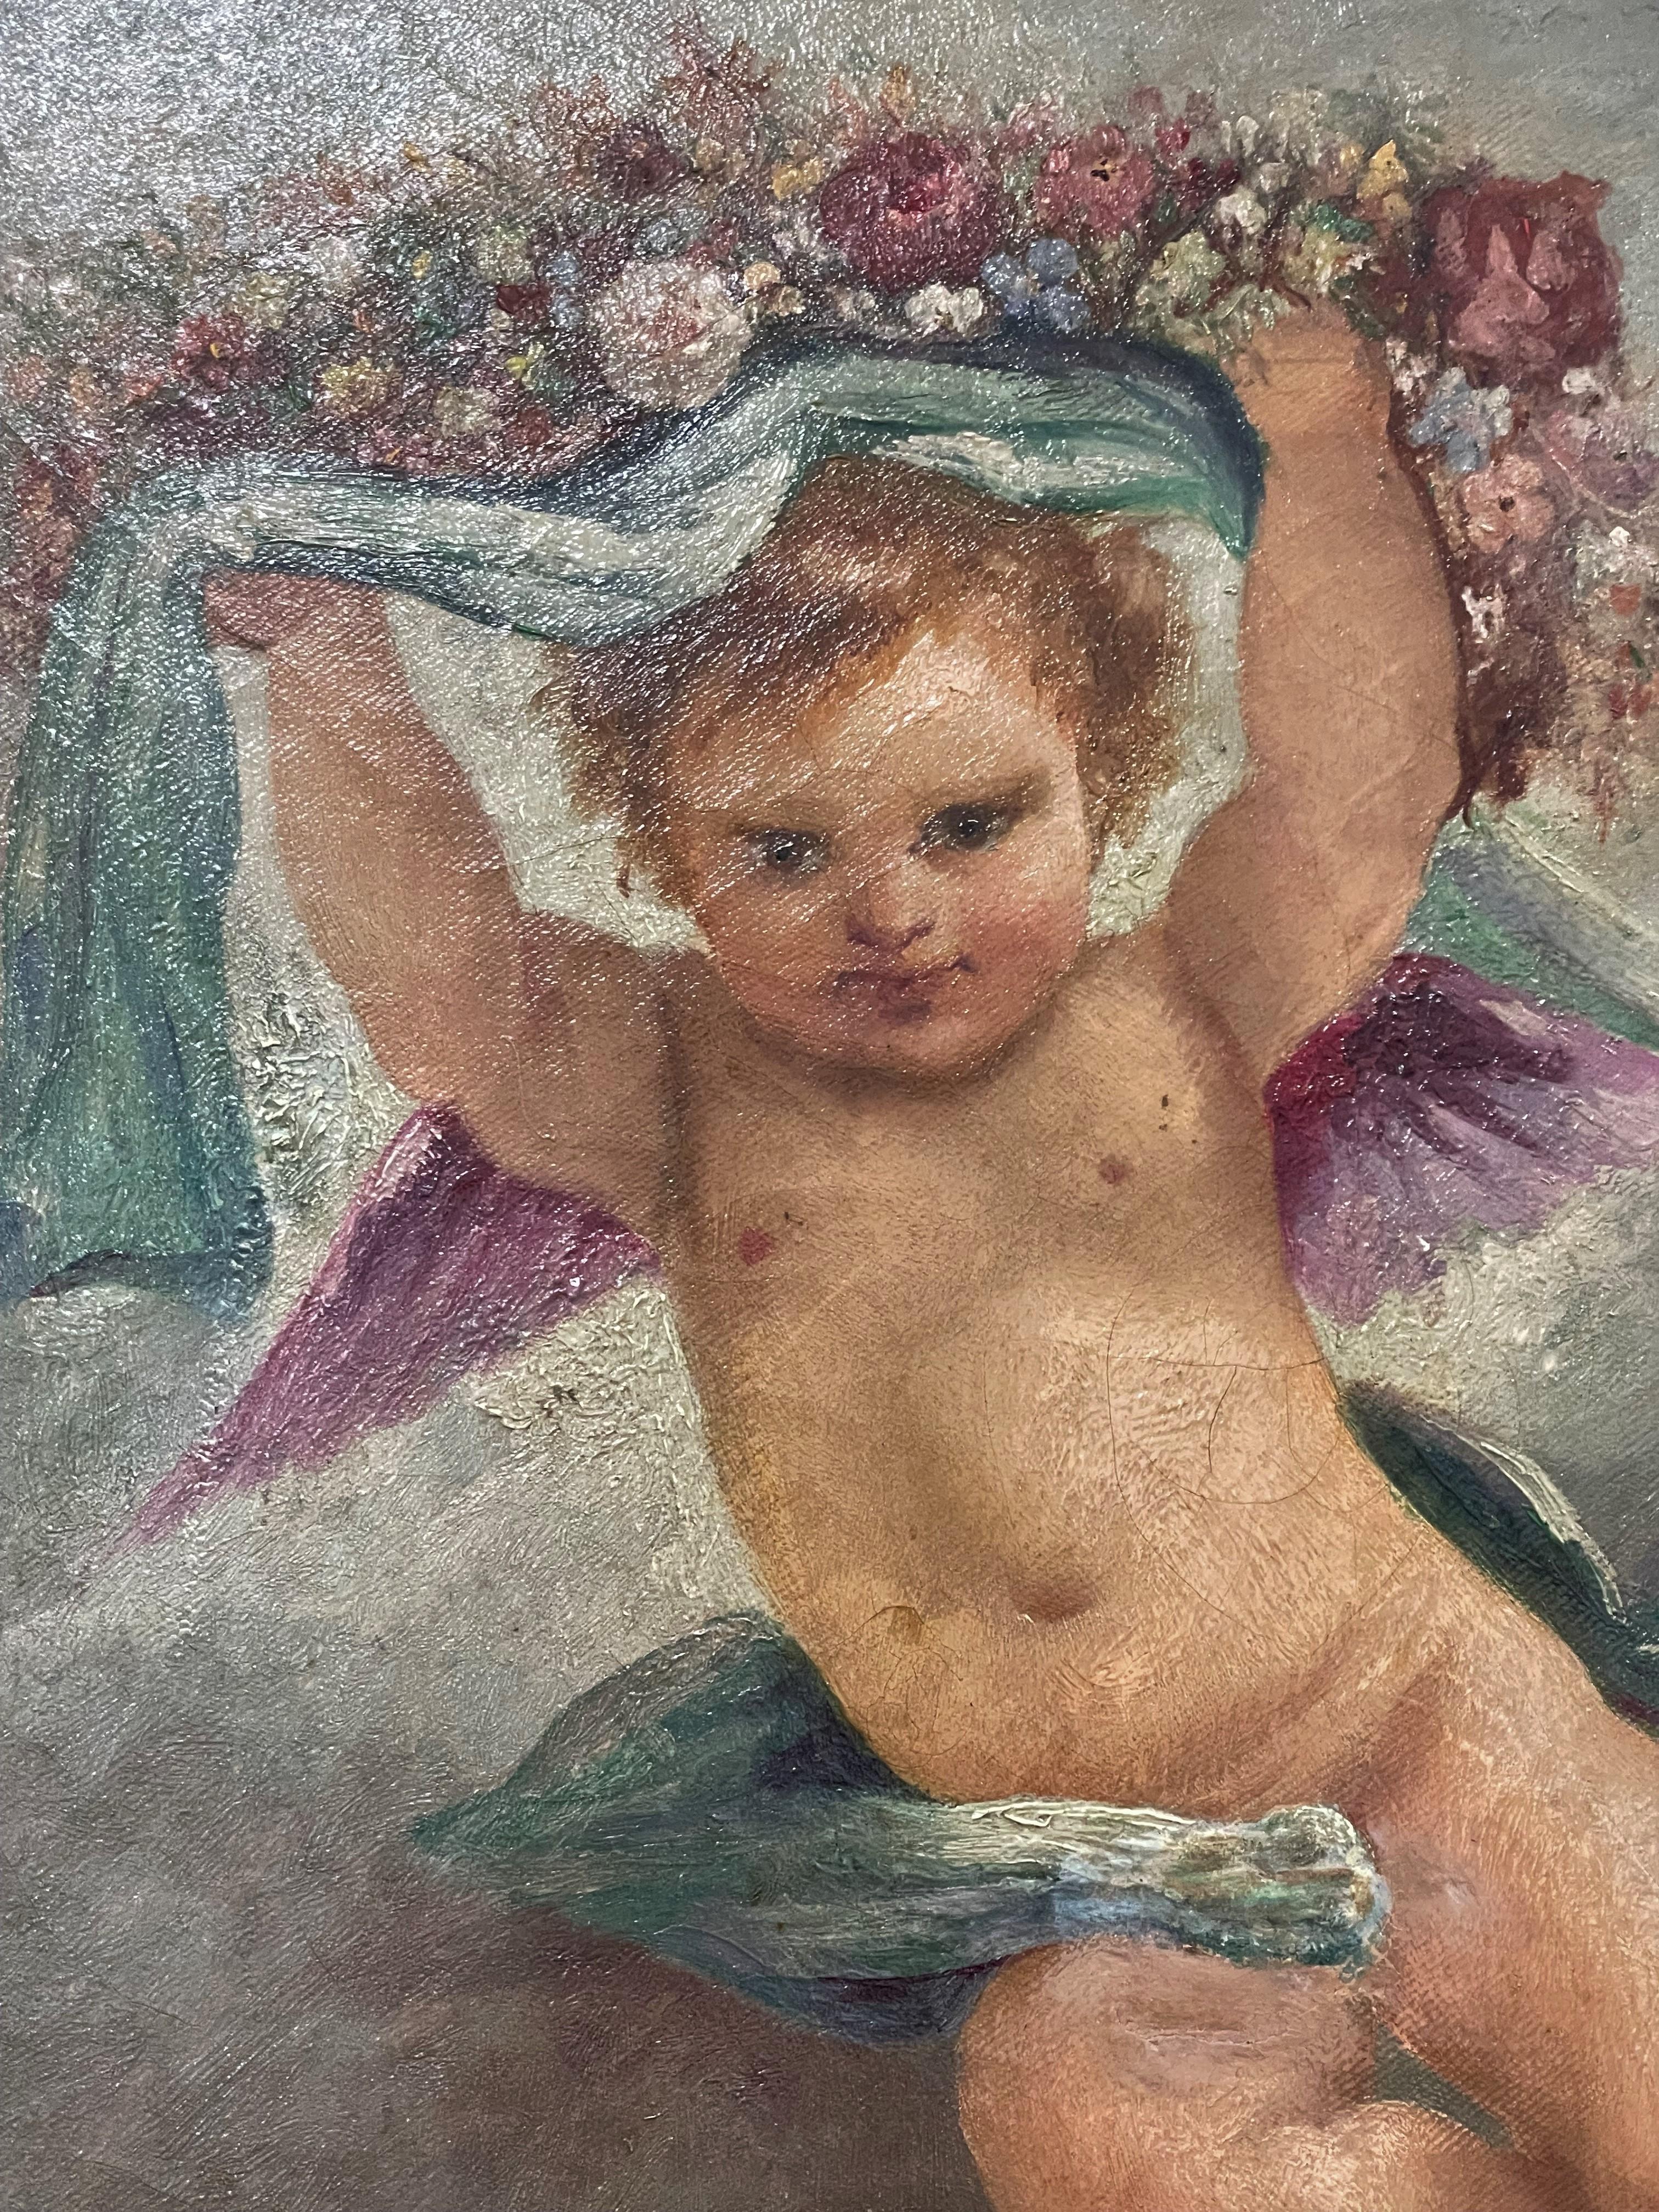 19th century oil on canvas. Cherub with floral wreath 

Craquelure is noticeable 

The condition is consistent with age. Please view all photos.

14 x 17 unframed, 18.25 x 21.25 framed